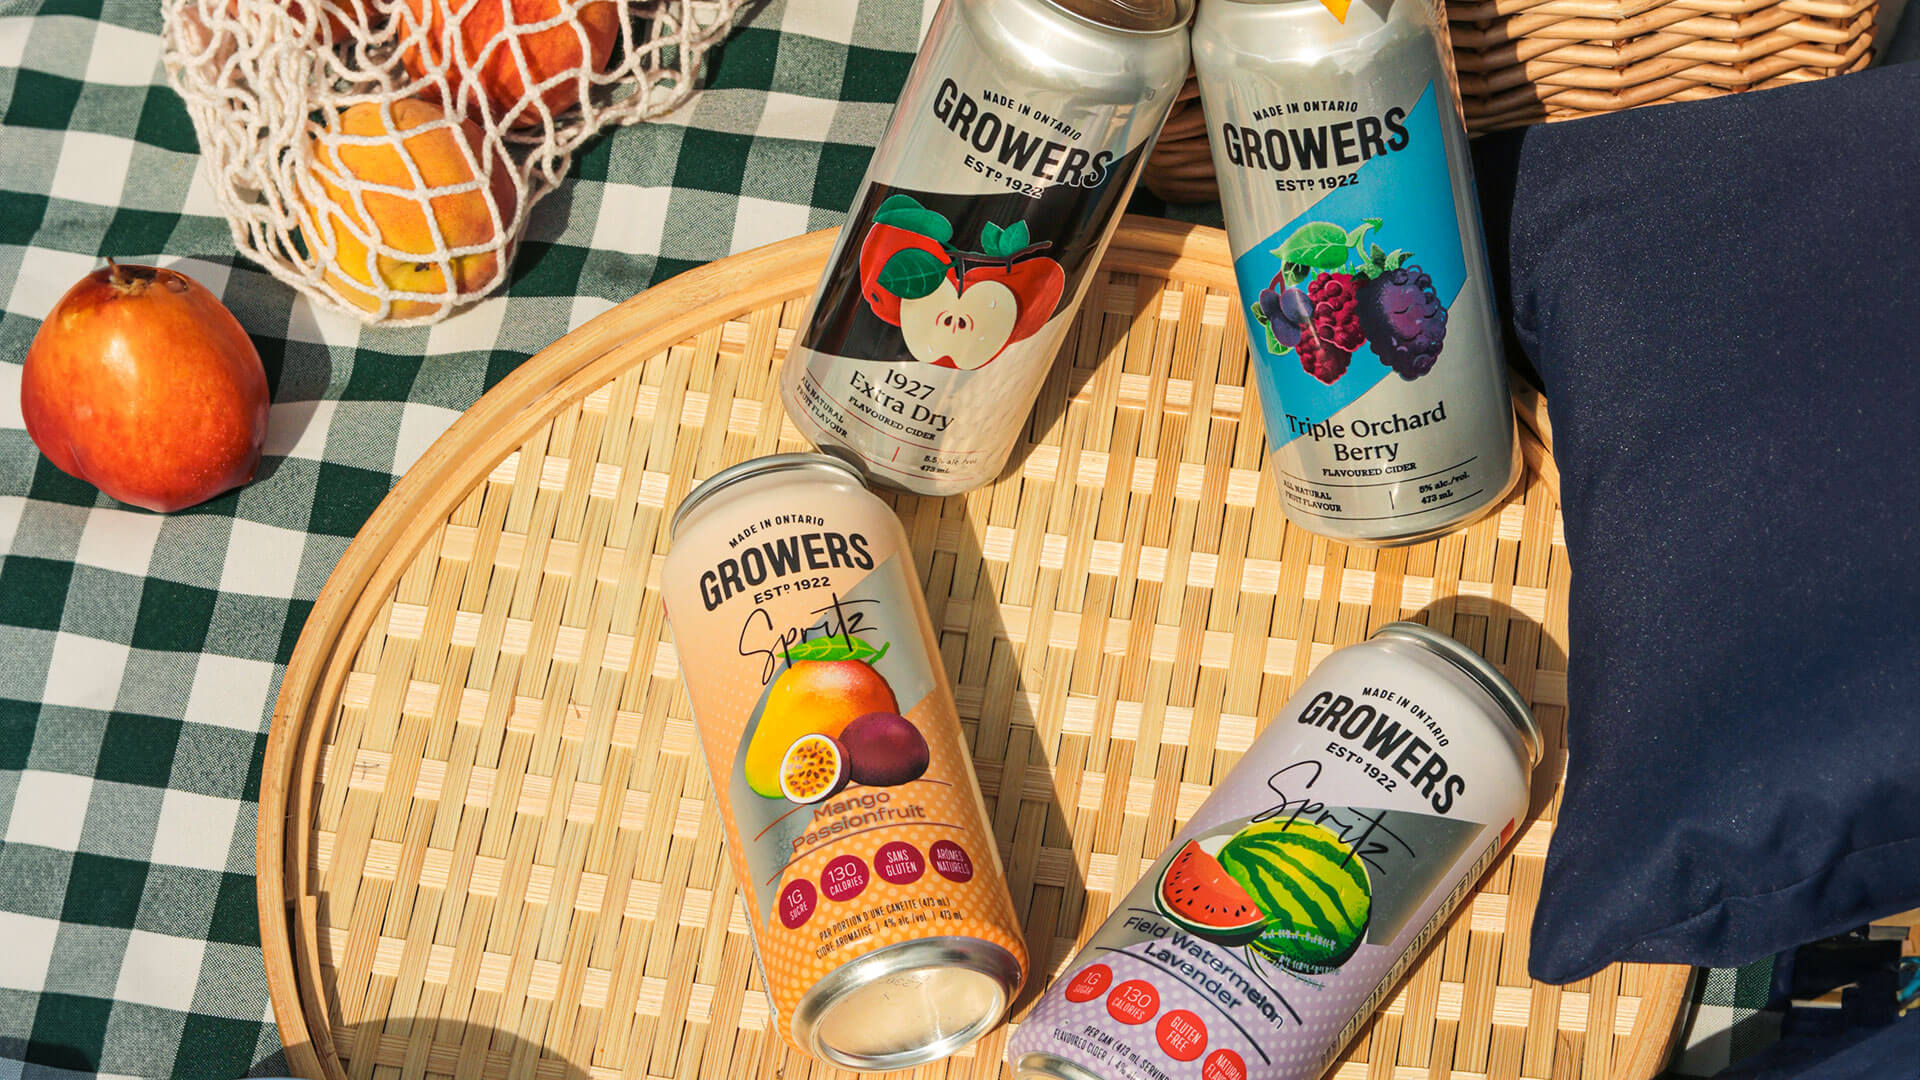 Growers Ciders Variety on a picnic table with peaches, pretzels, and sunflowers.